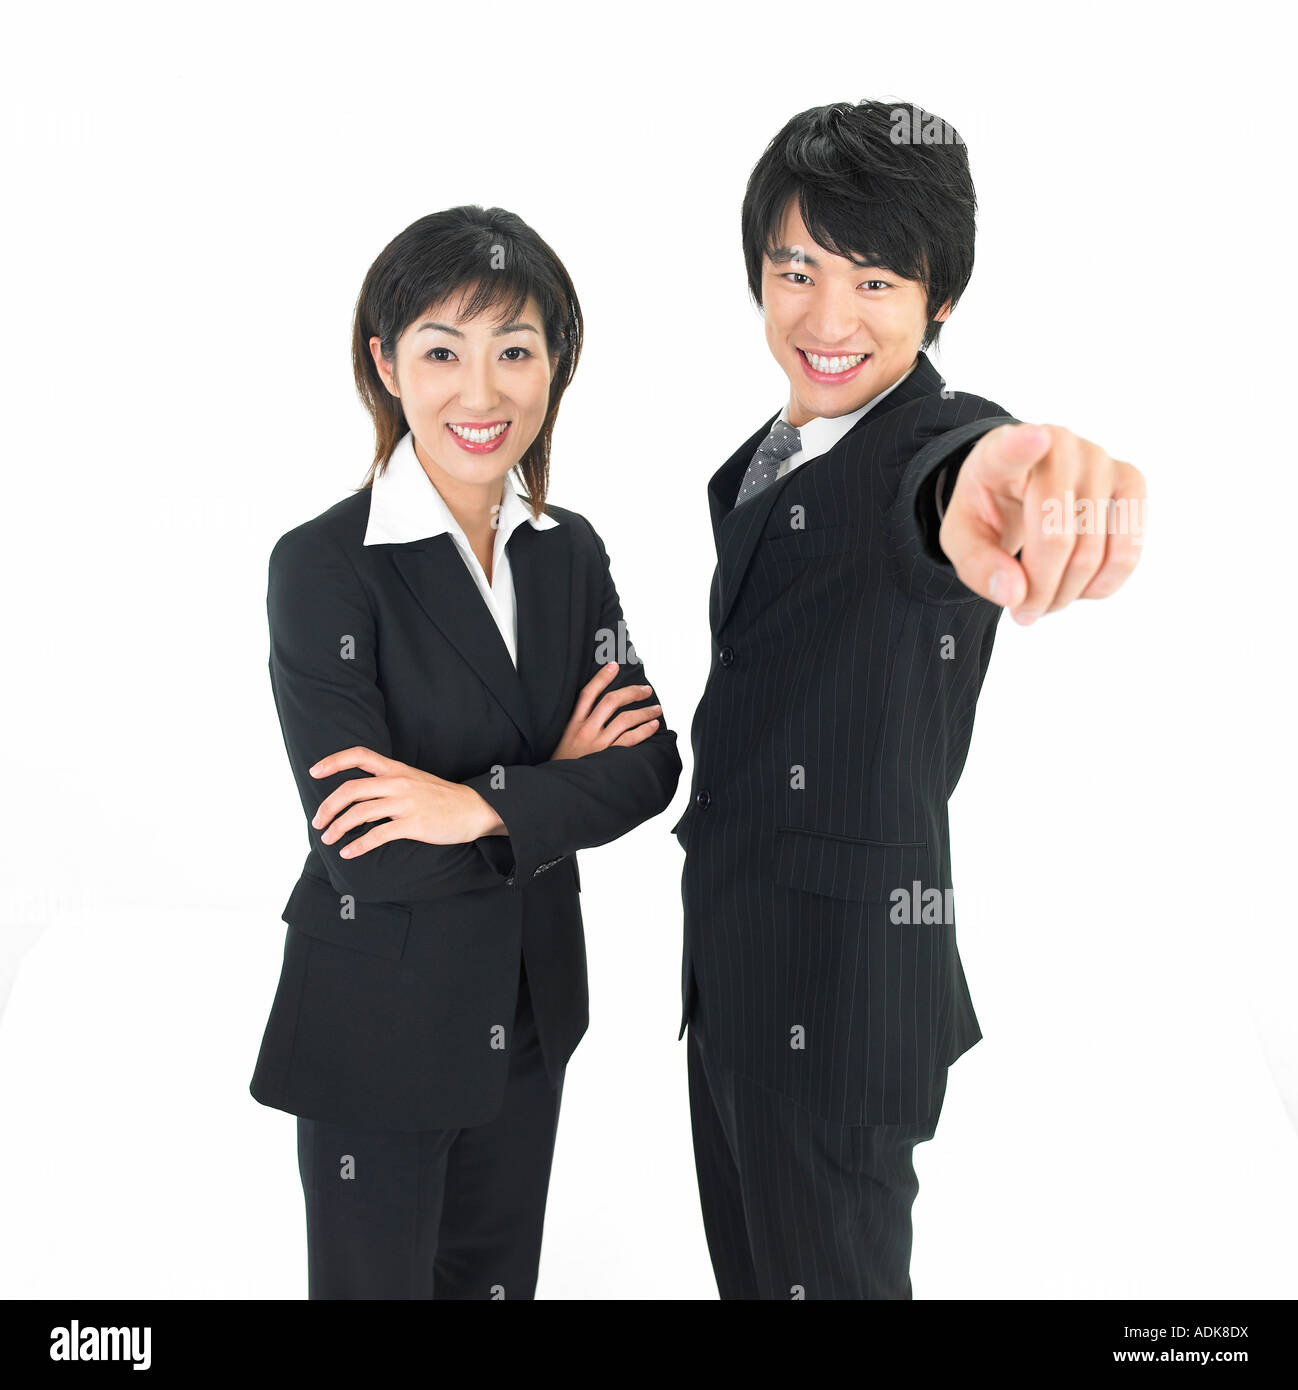 a businesswoman and a businessman making a gesture Stock Photo